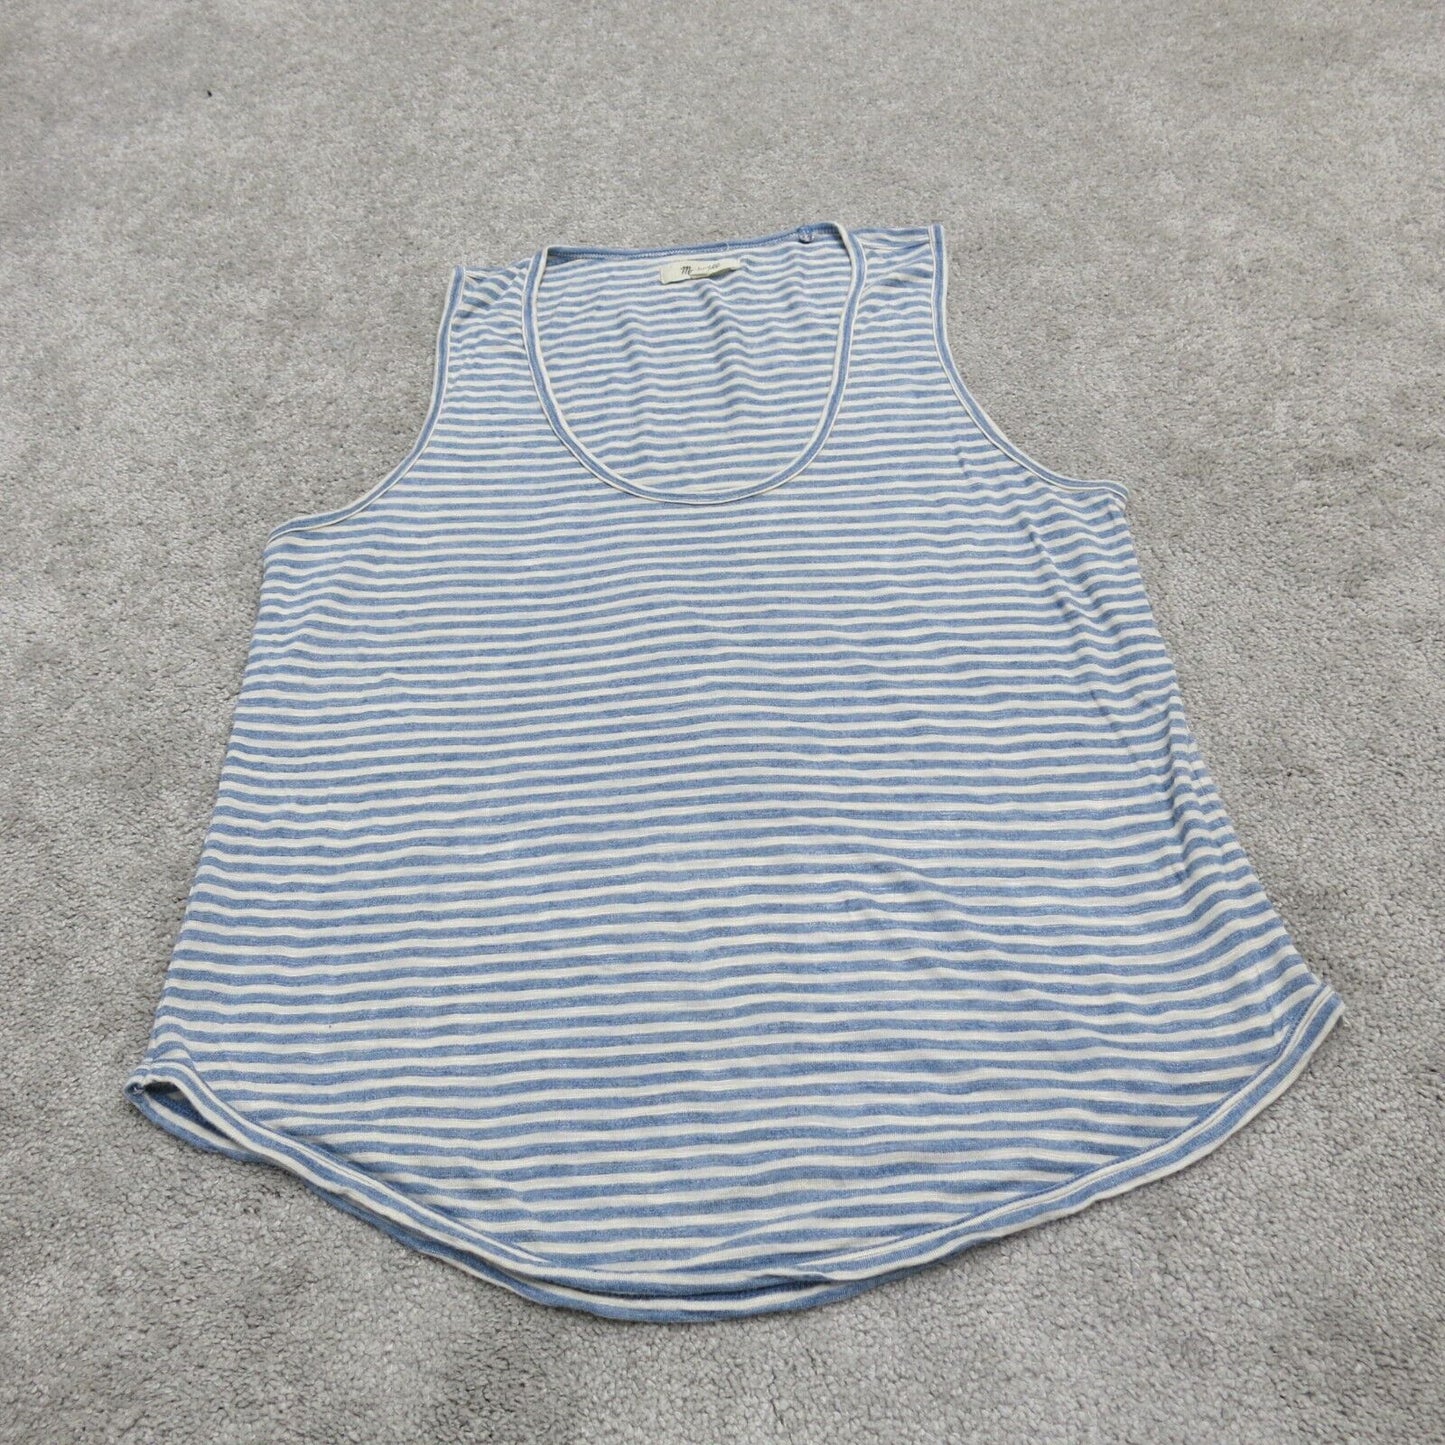 Madewell Womens Activewear Tank Tee Stripped Scoop Neck White Blue Size Medium